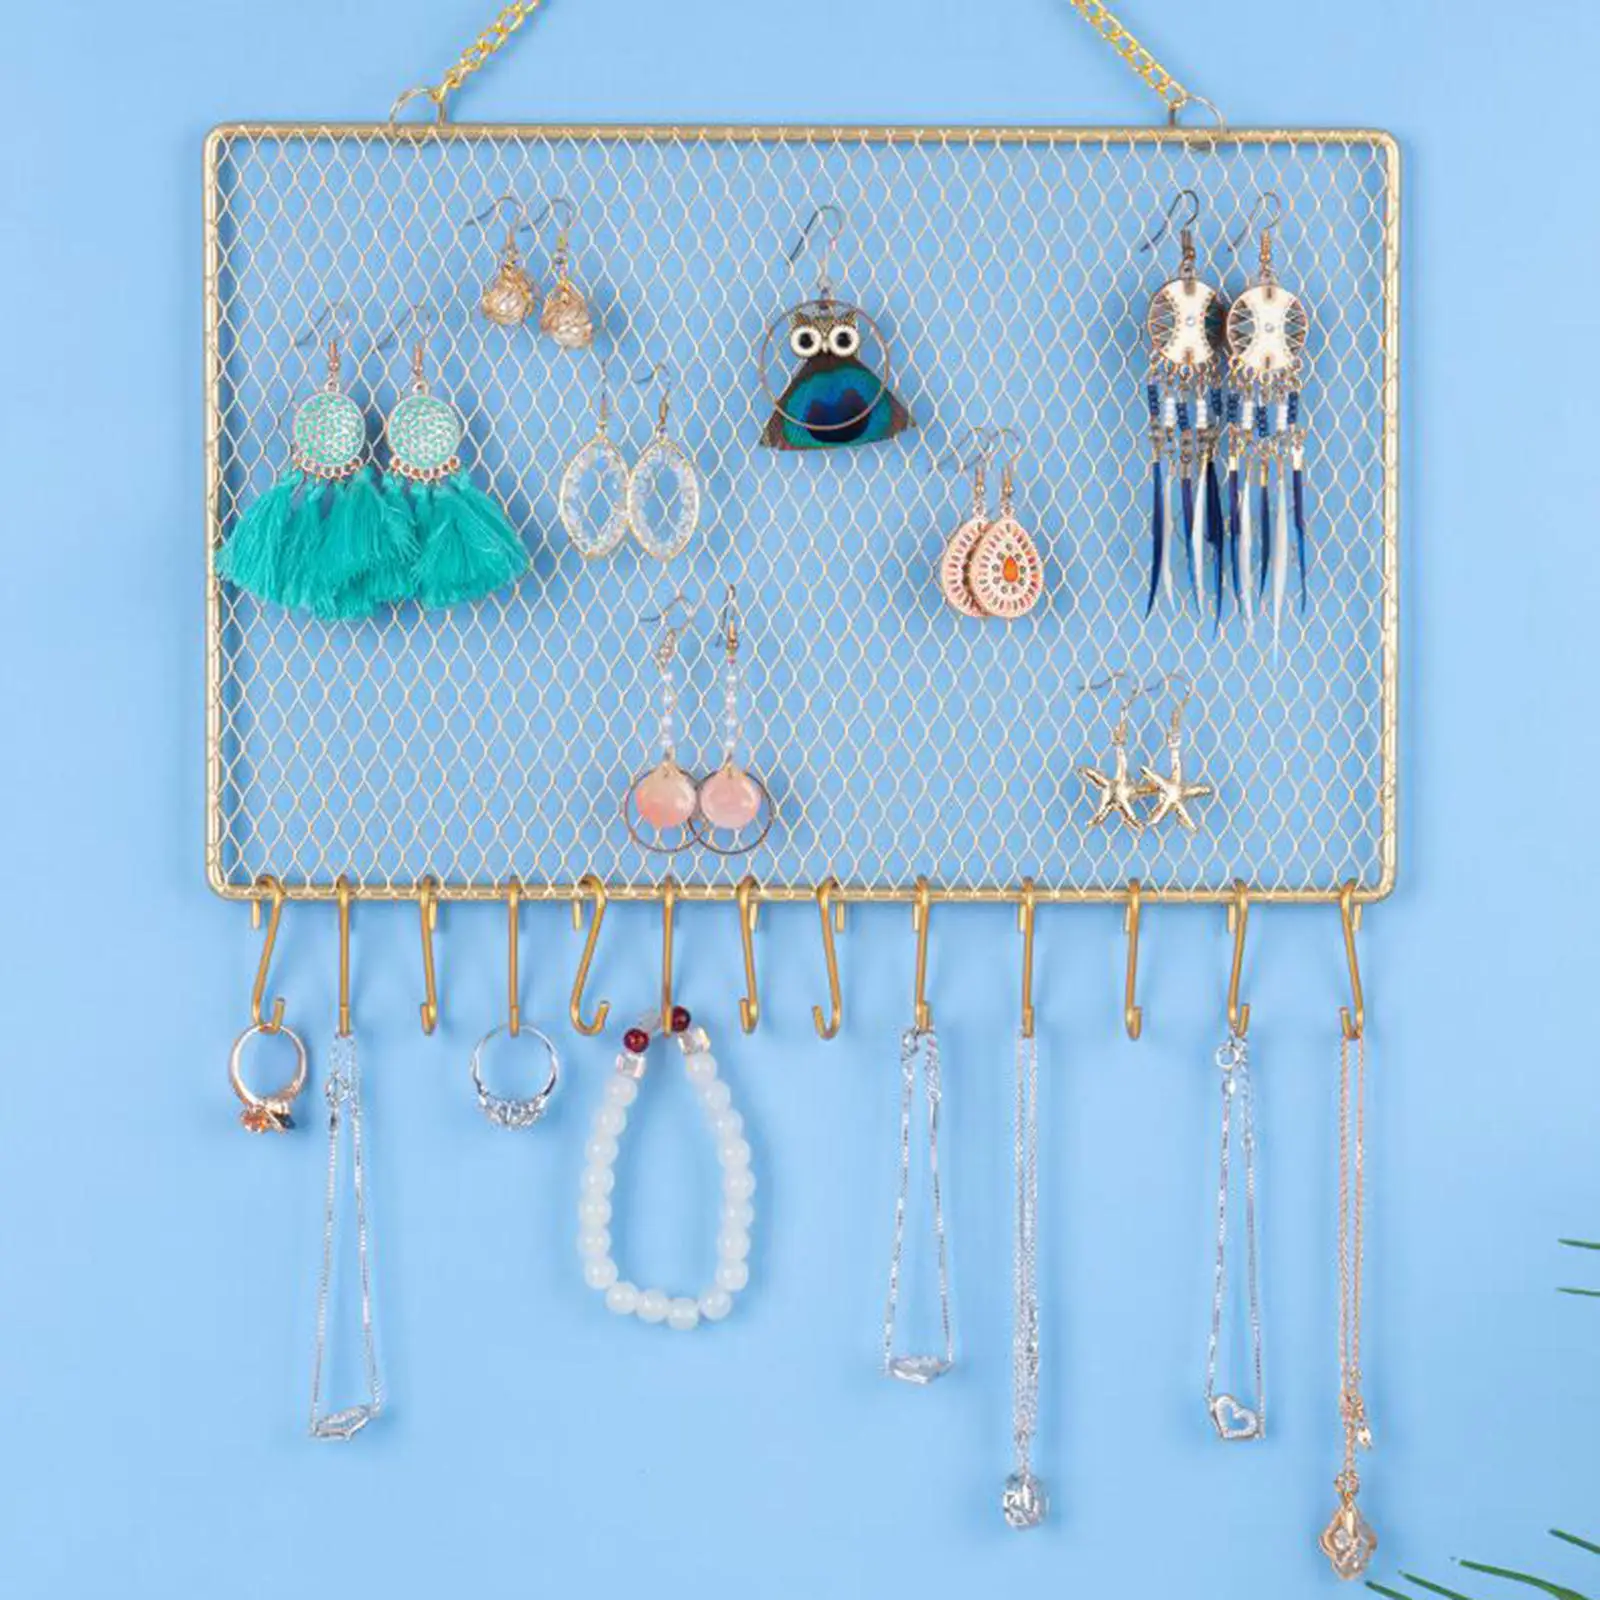 Display Screen Rectangle Rectangle Grid Decorative Storage Necklace Diamond Earring Metal Jewelry Organizer Holder Wall